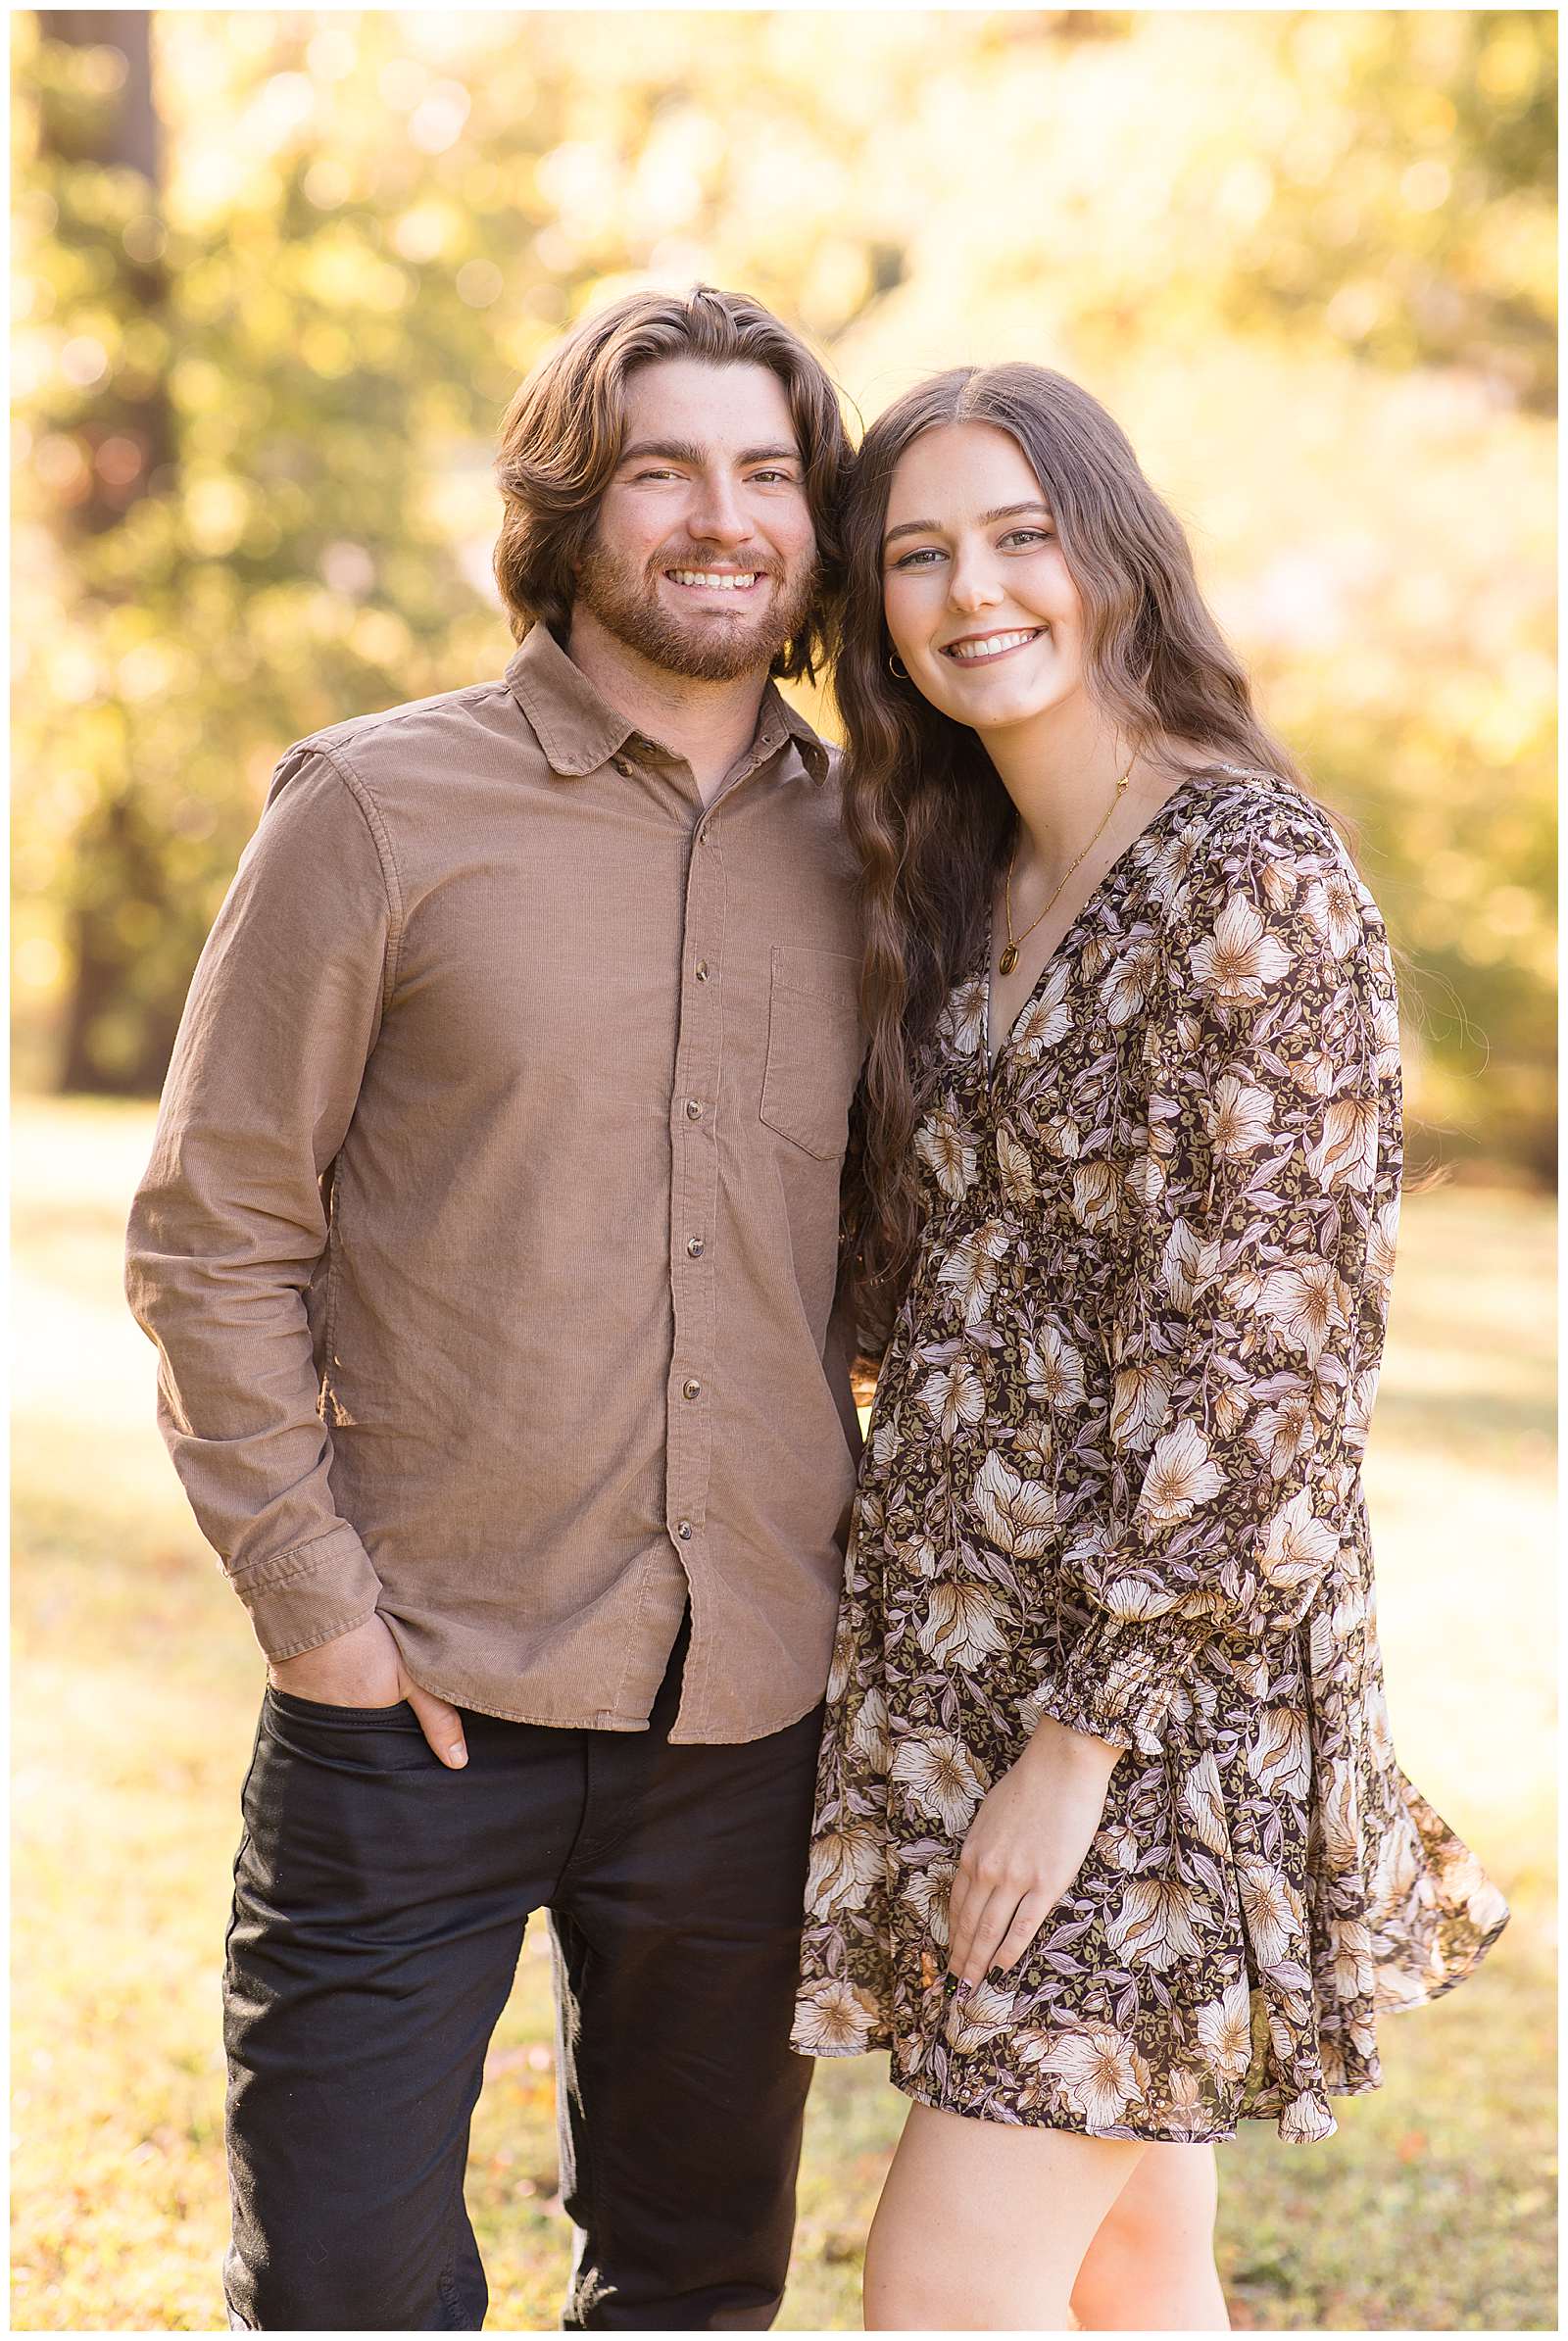 Young couple stands together during their fall family session in Tennessee.  They coordinate wearing brown tones with the boyfriend wearing a light brown button down shirt and dark pants and his girlfriend wears a brown dress with white and tan flowers on it.